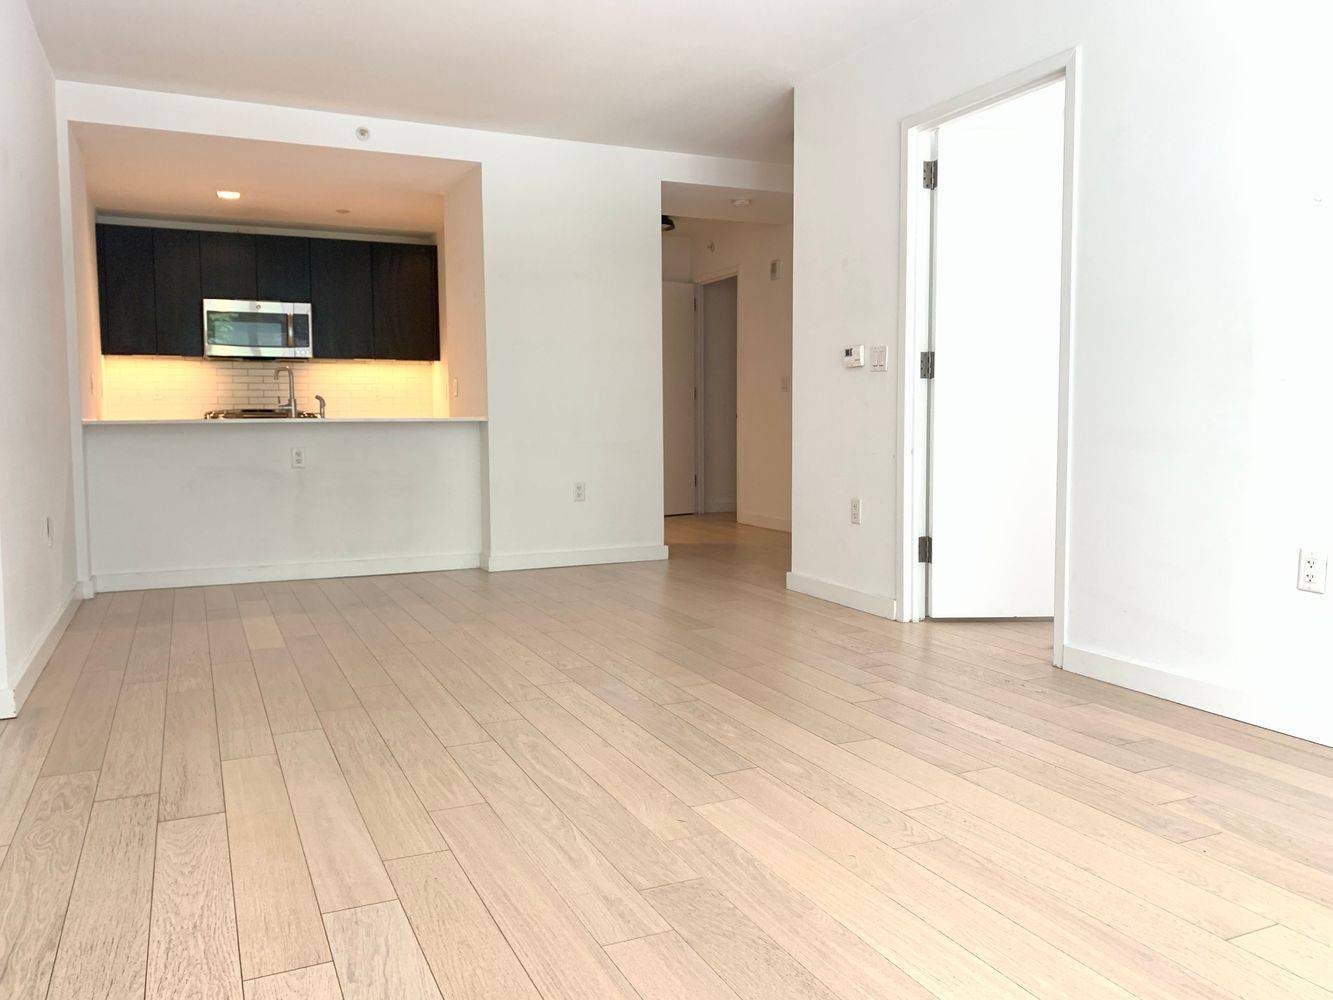 *AMAZING DEAL* Spacious 1 Bed 1 Bath | 840 sq ft| Walk-in Closet | Home Office | Condo-level Fixtures | Luxury Building